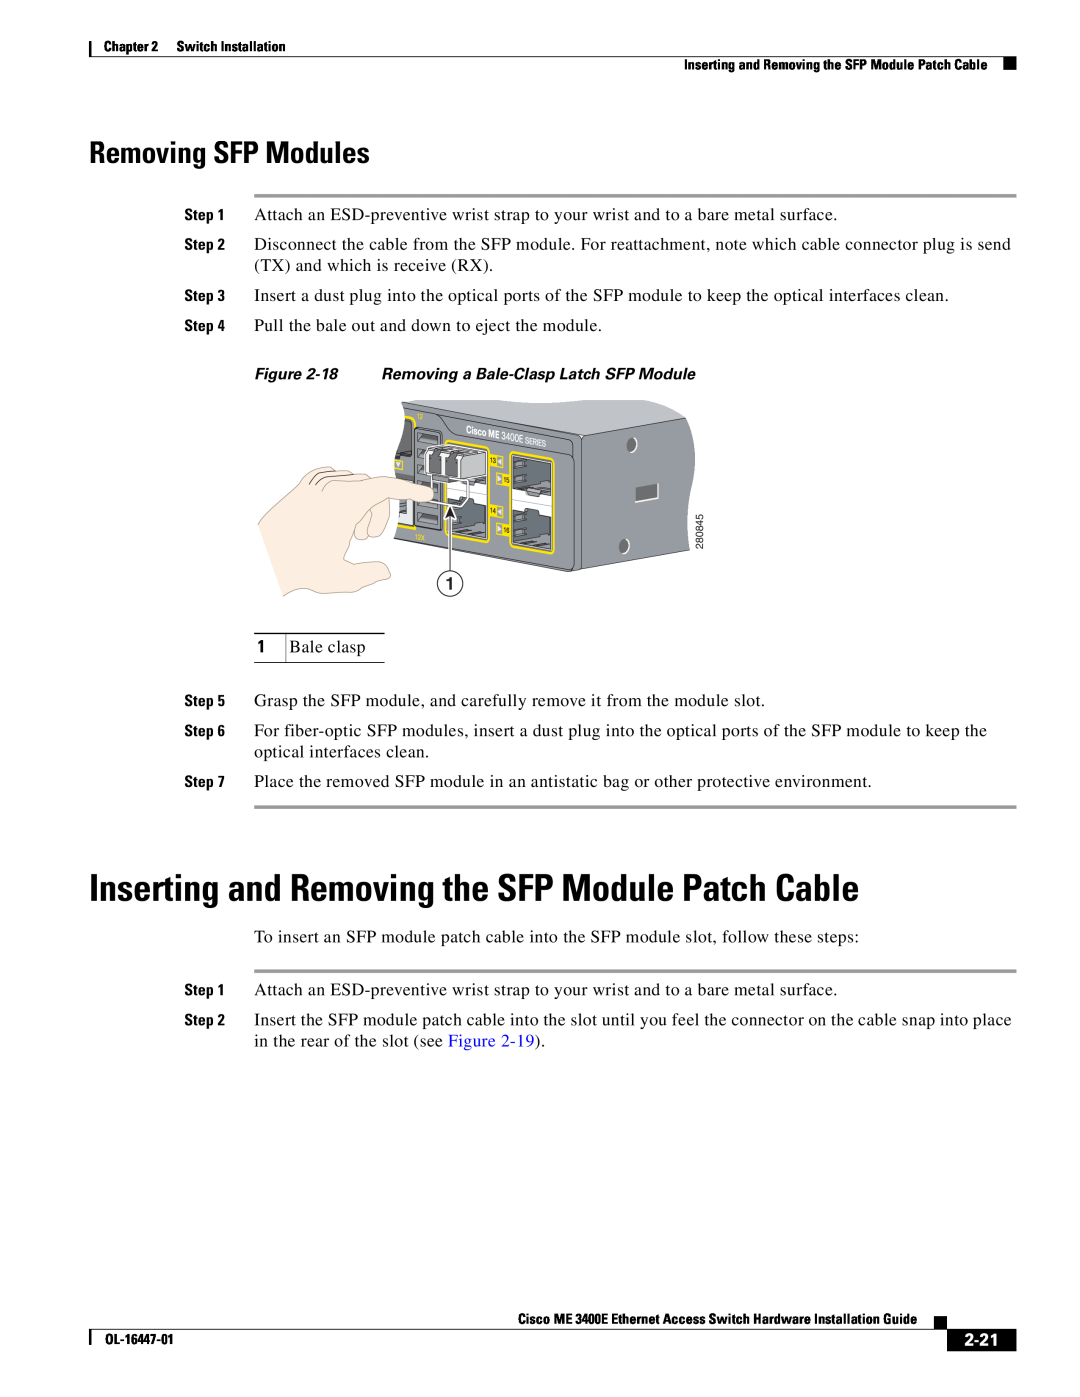 Cisco Systems OL-16447-01 manual Inserting and Removing the SFP Module Patch Cable, Removing SFP Modules, 2-21 